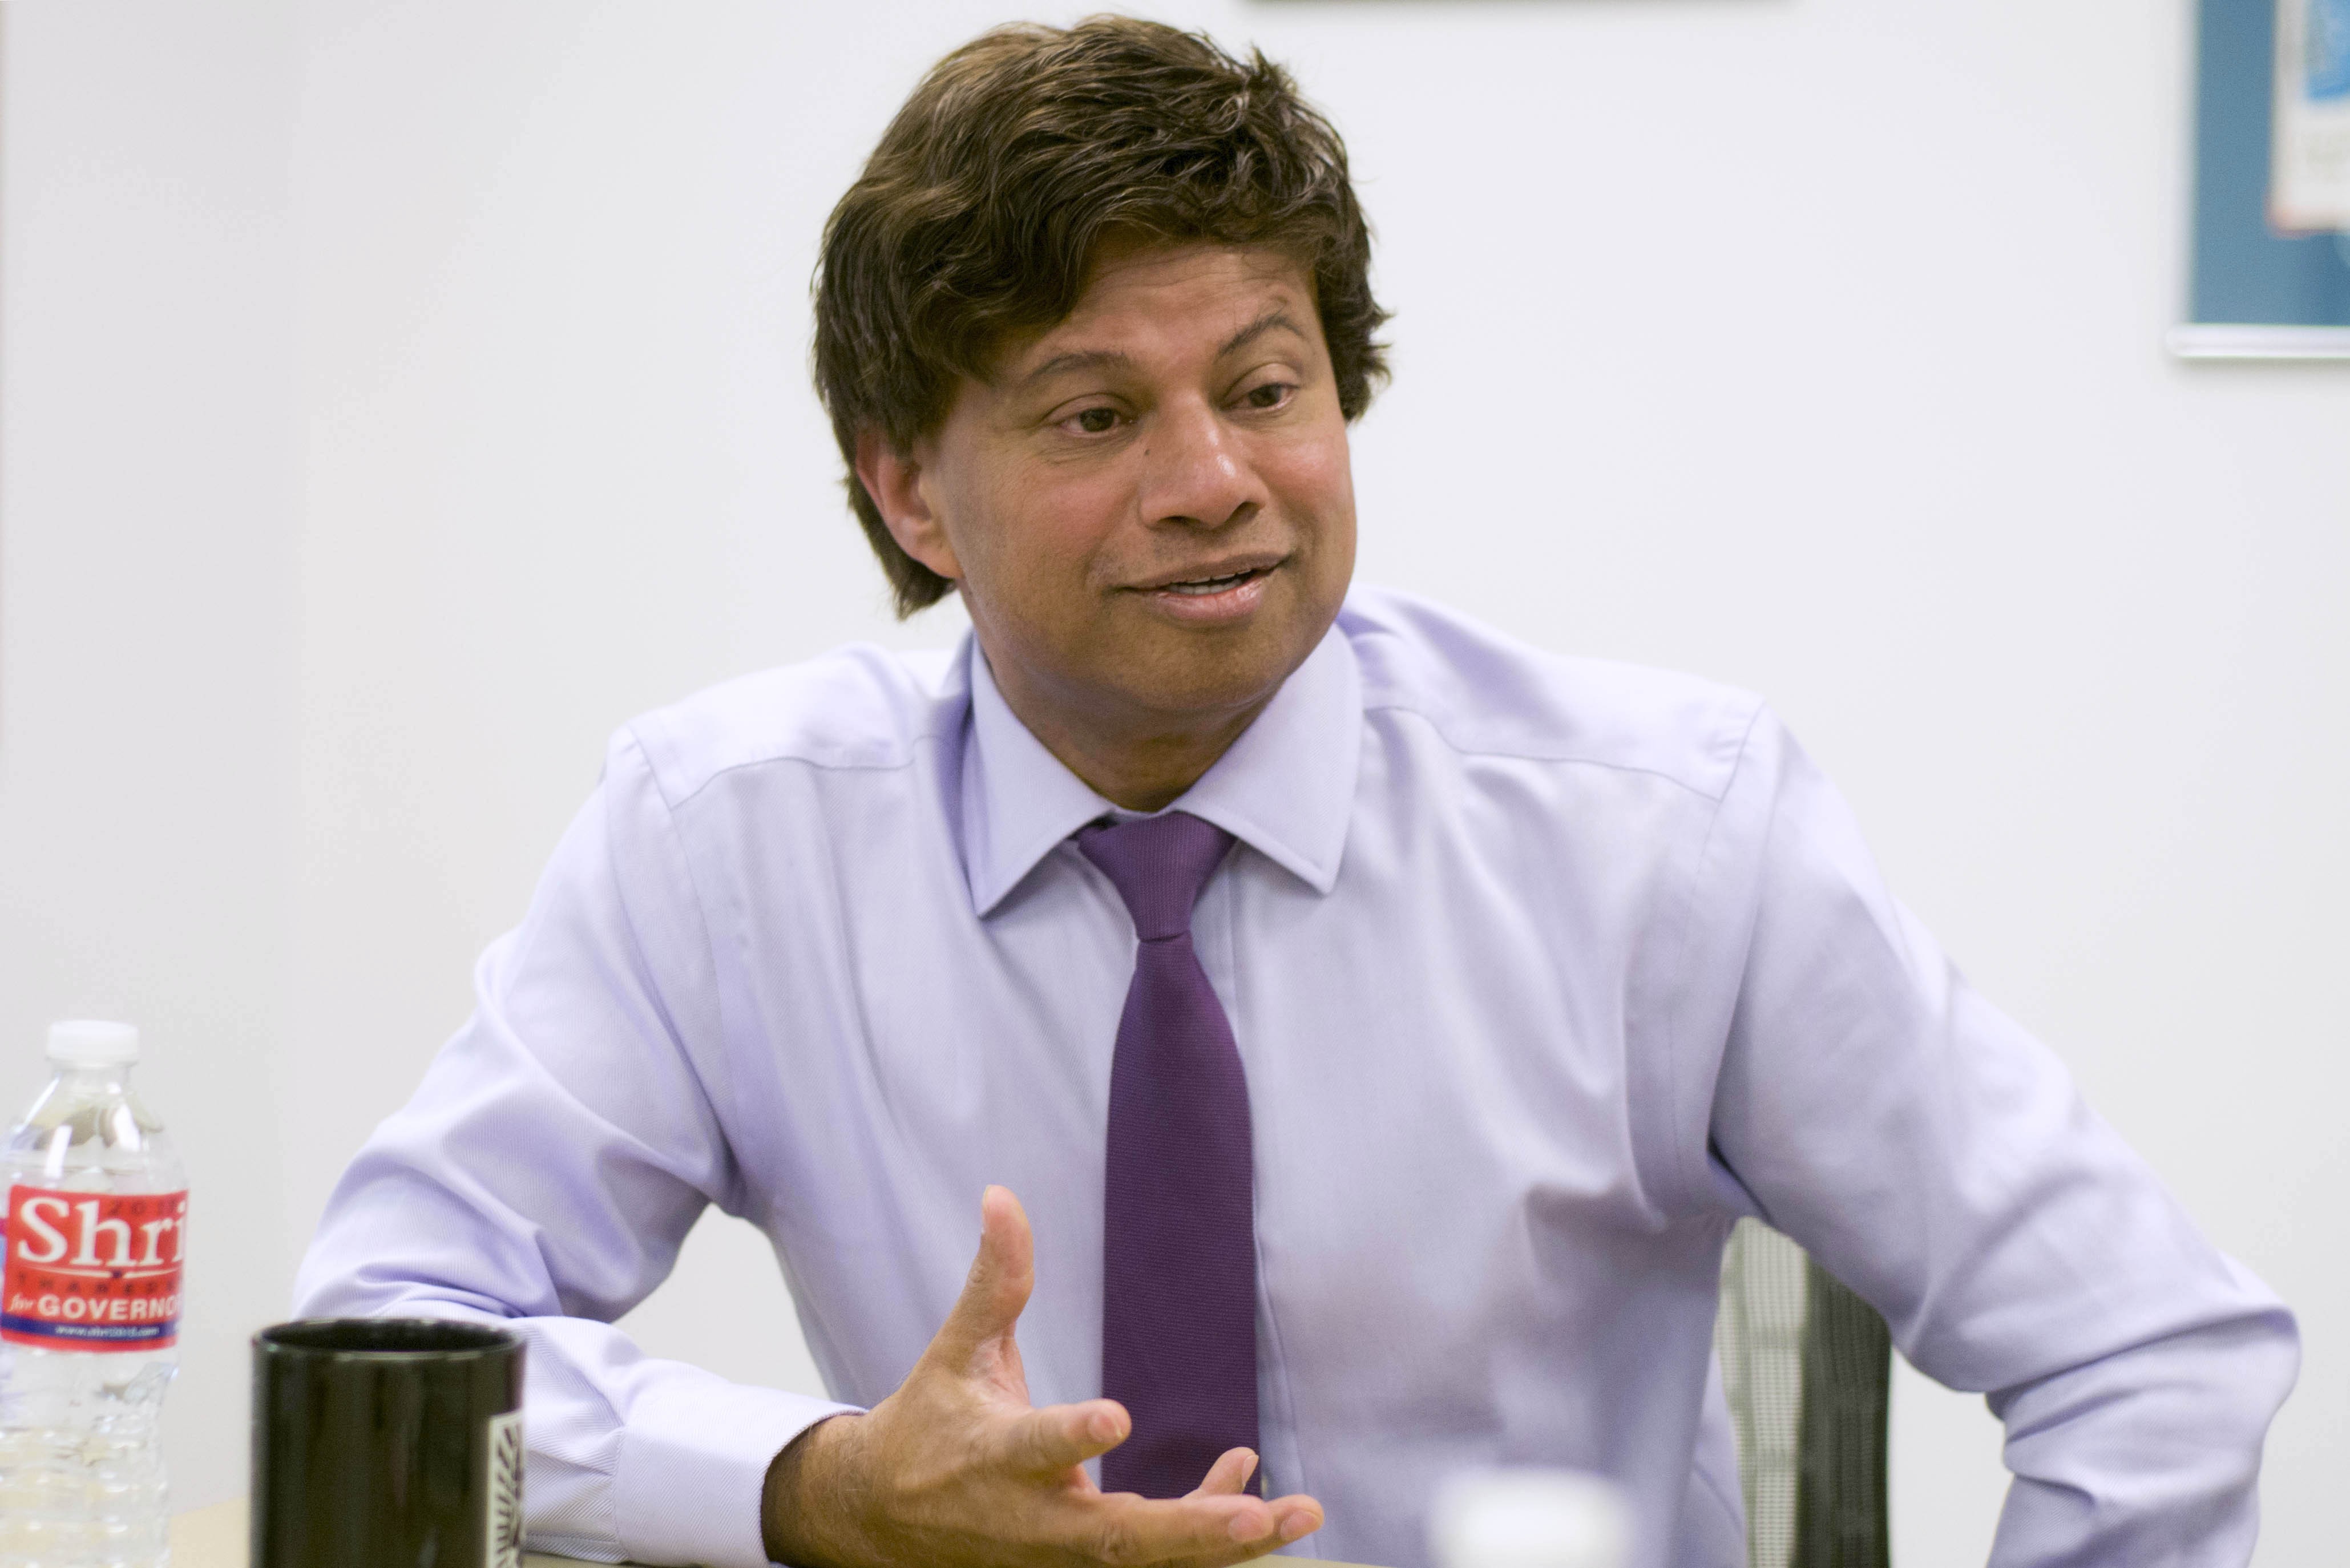 Shri Thanedar now leads Whitmer in polls for Governor, despite endorsements from Mike ...